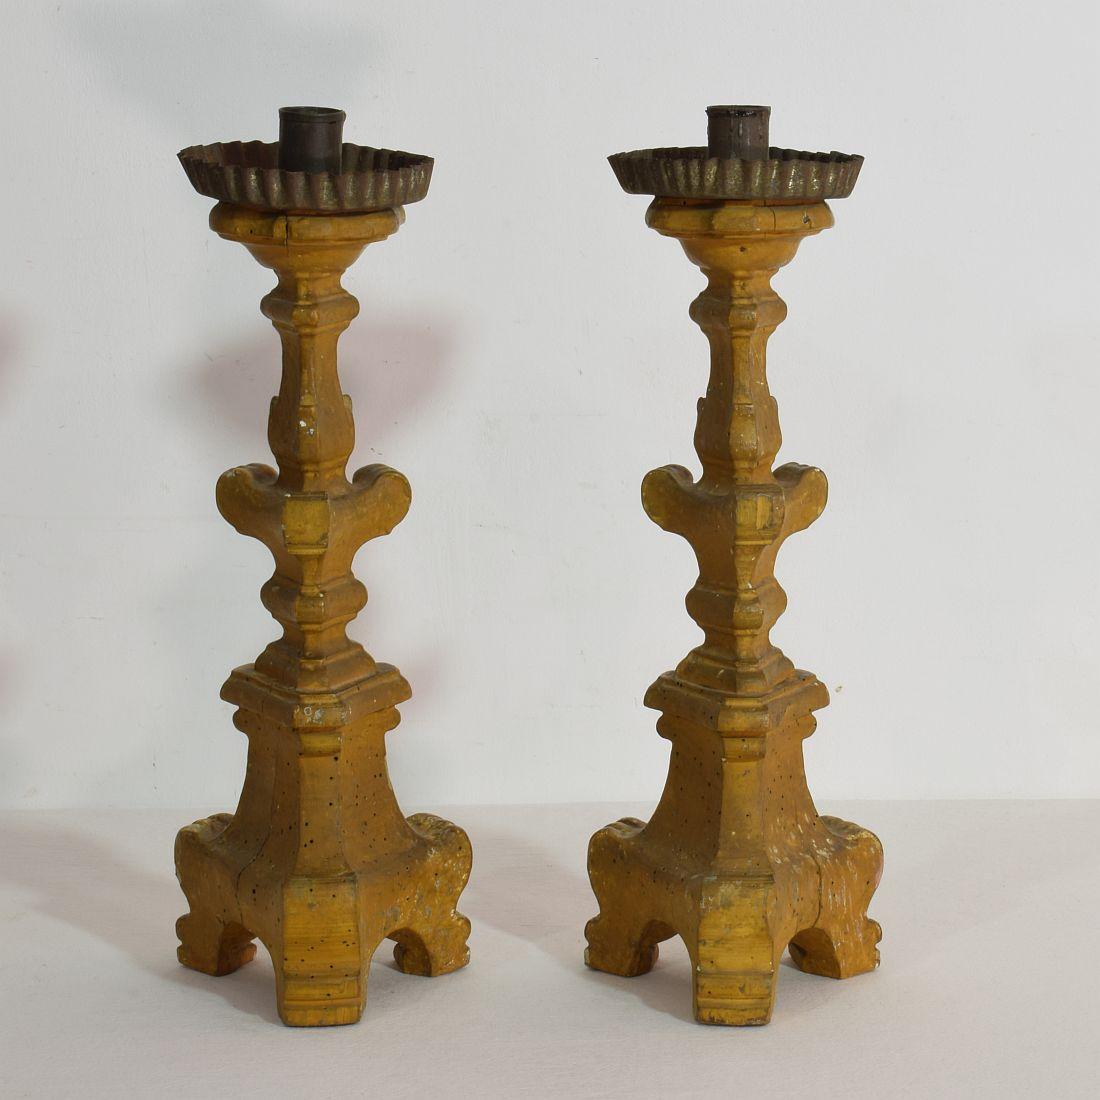 Pair of 18th Century Italian Giltwood Baroque Candlesticks or Candleholders 1